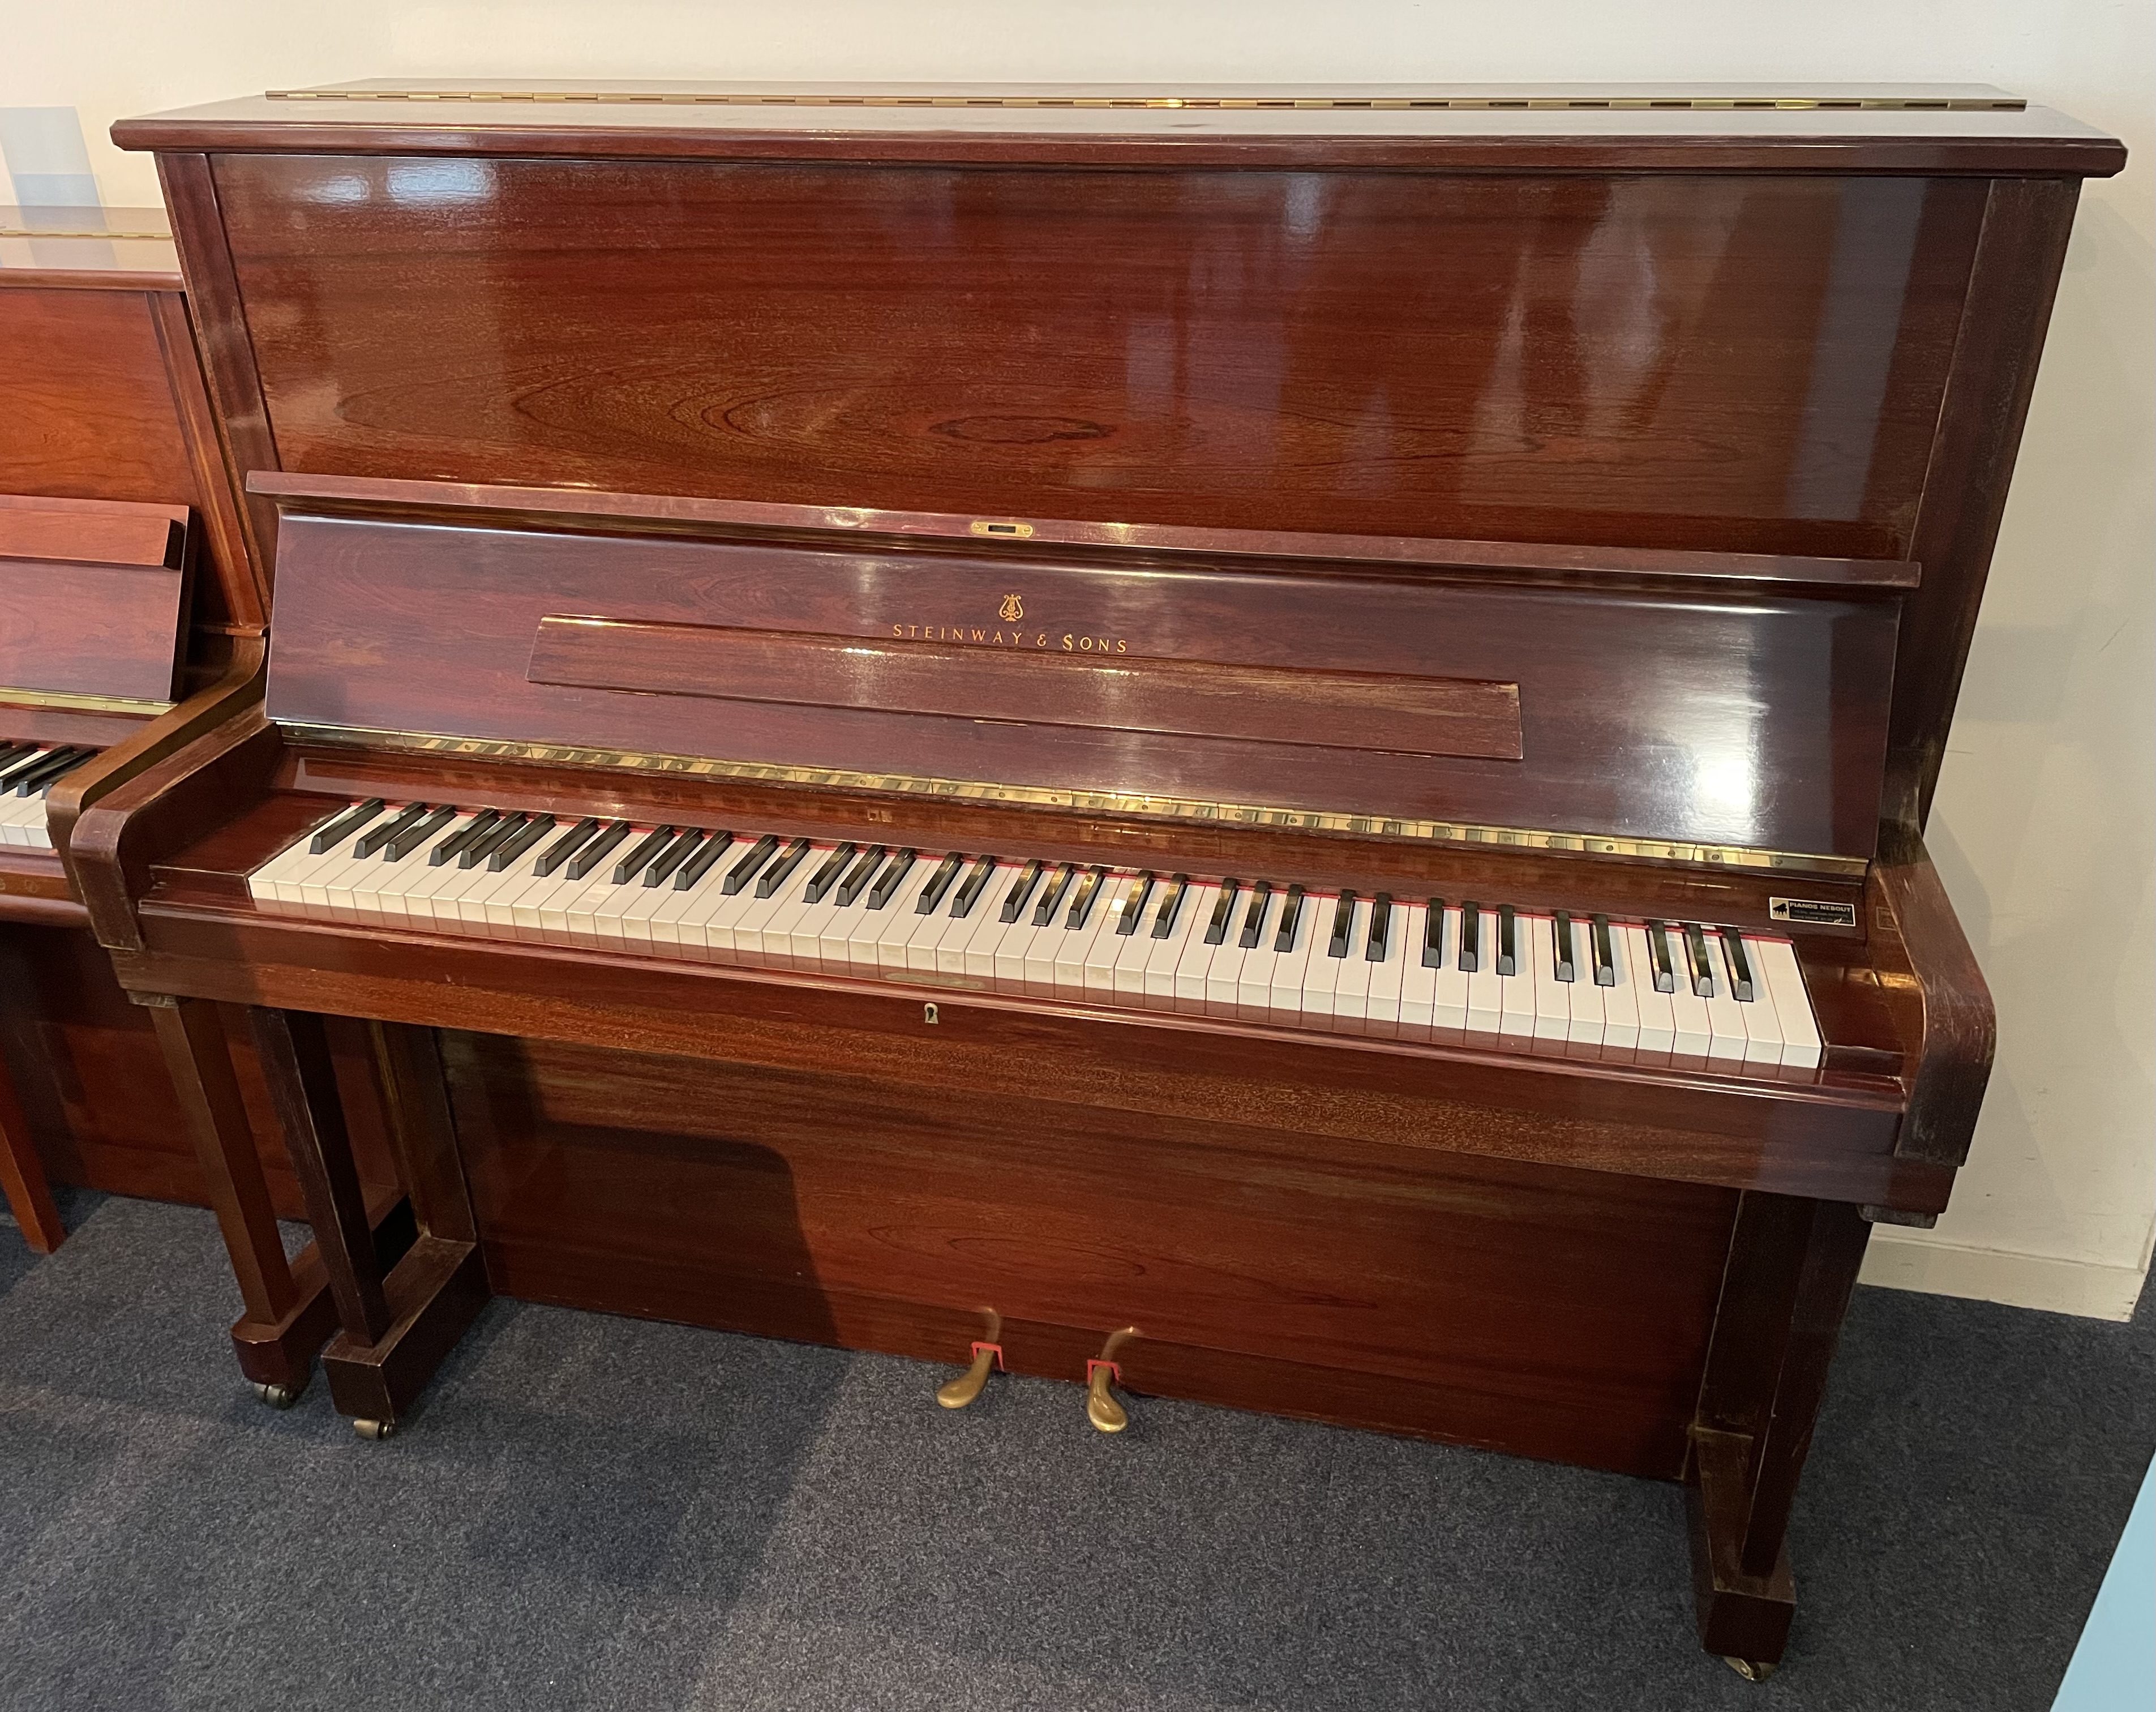 Occasion Steinway & Sons K-132 (1990)